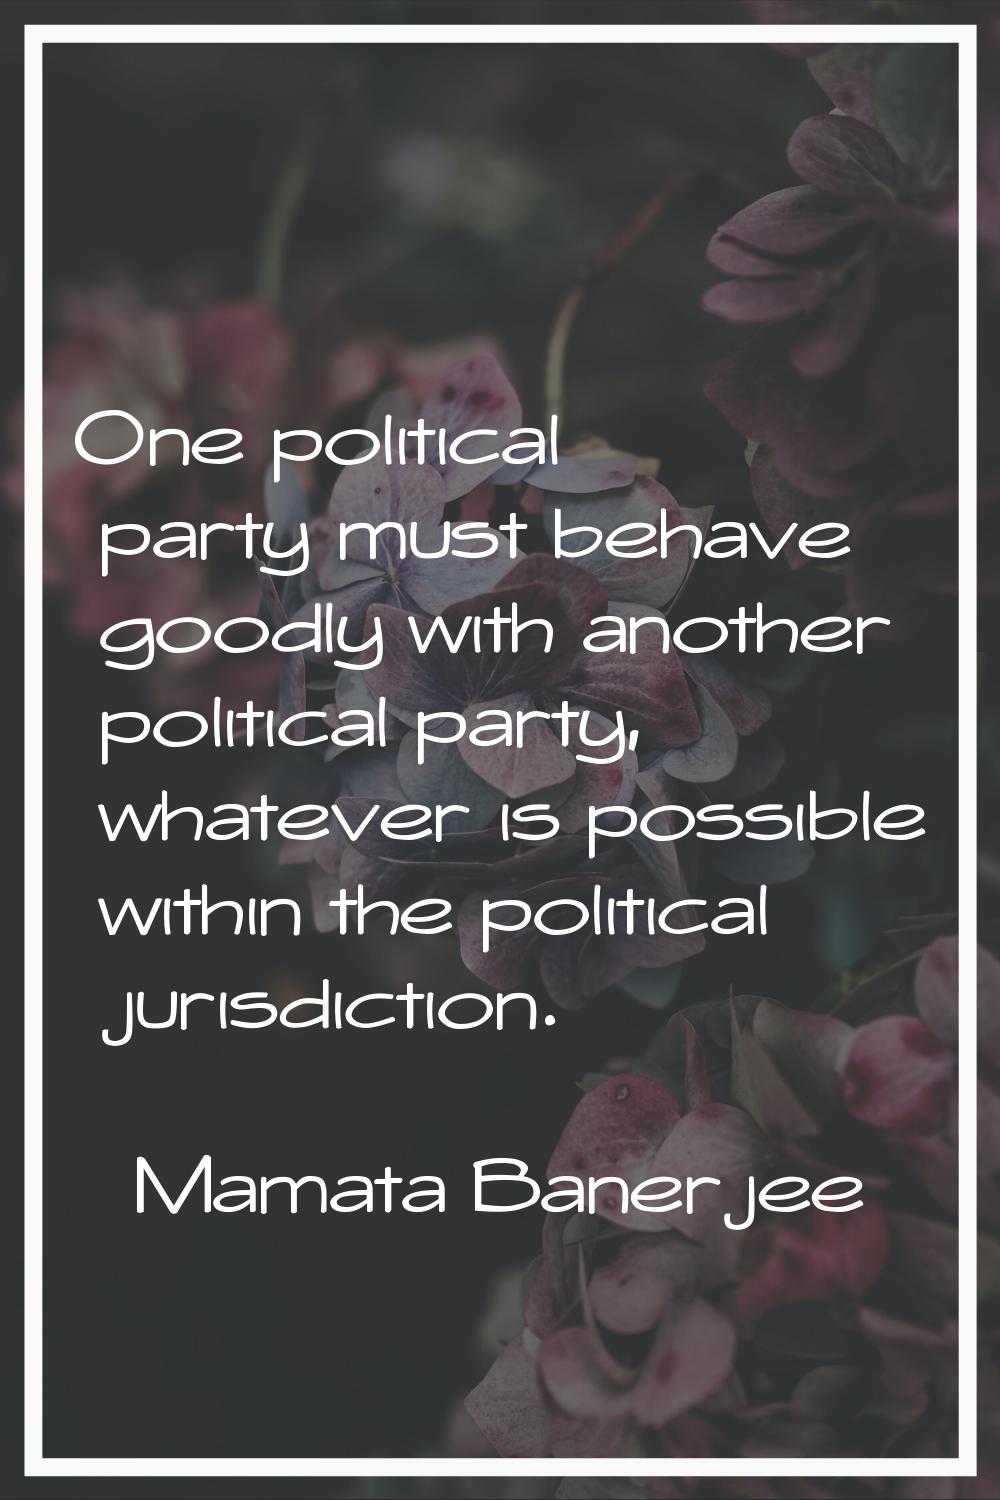 One political party must behave goodly with another political party, whatever is possible within th